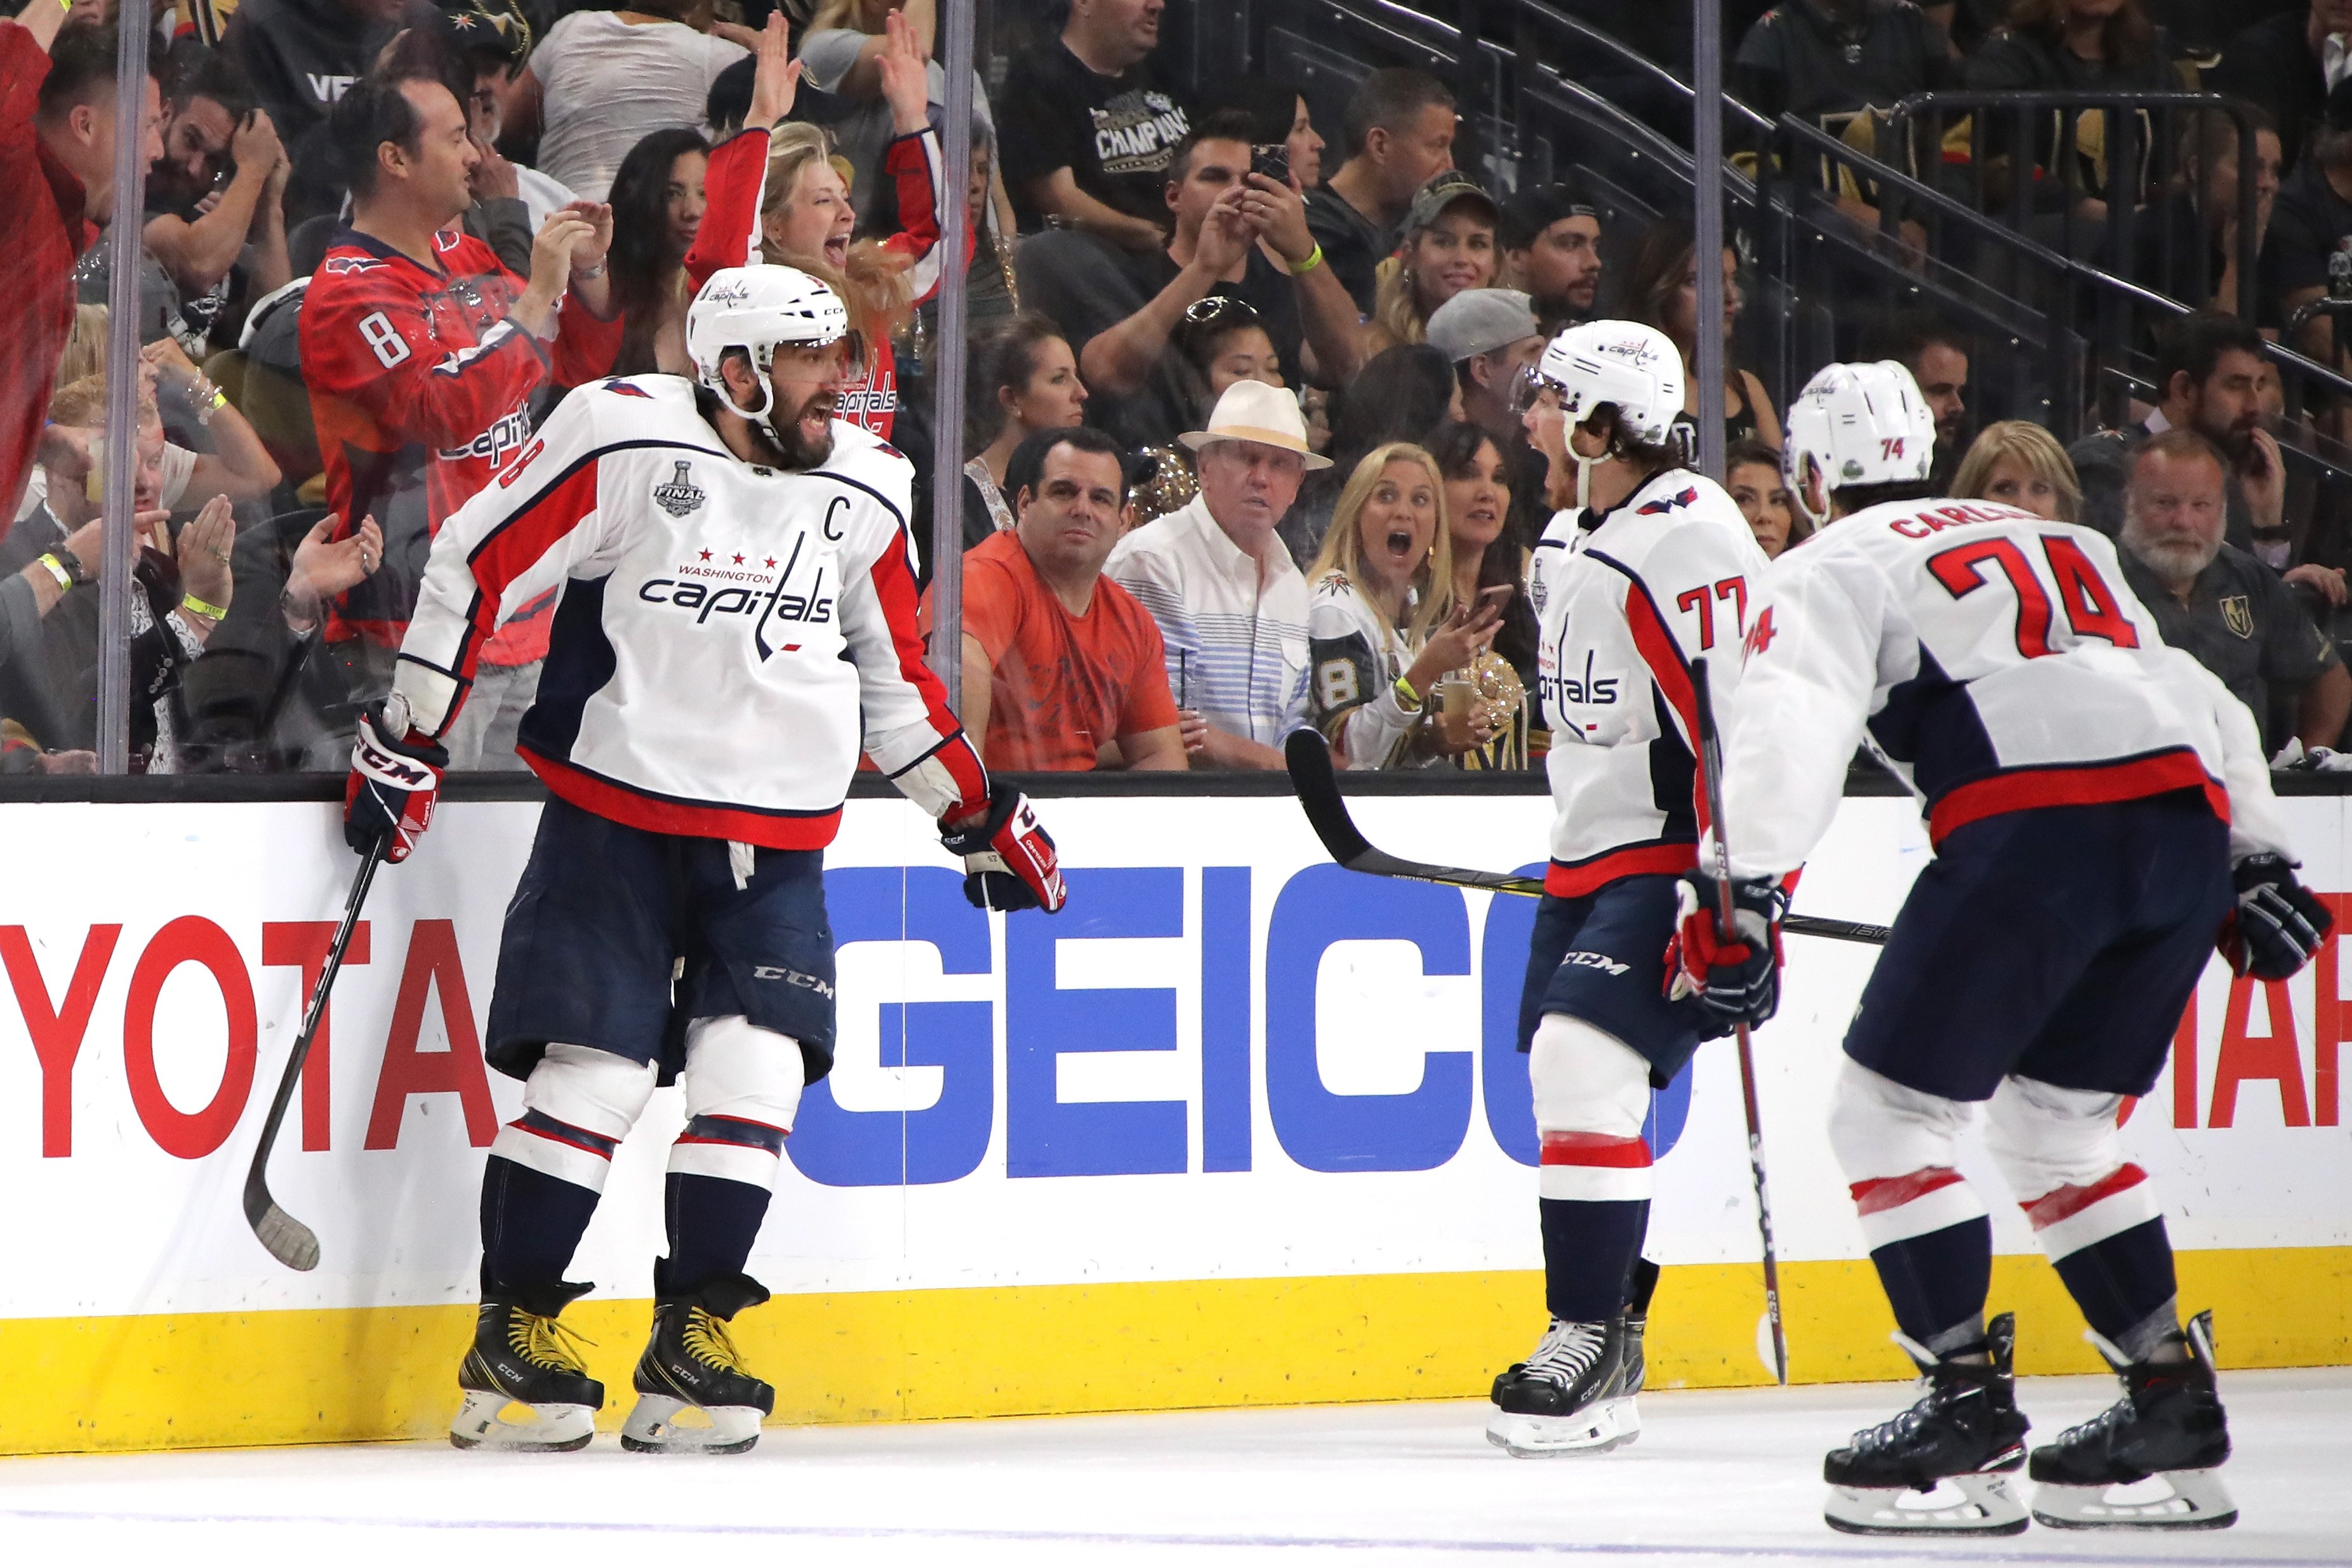 At long last, Ovechkin and Capitals are Stanley Cup champs